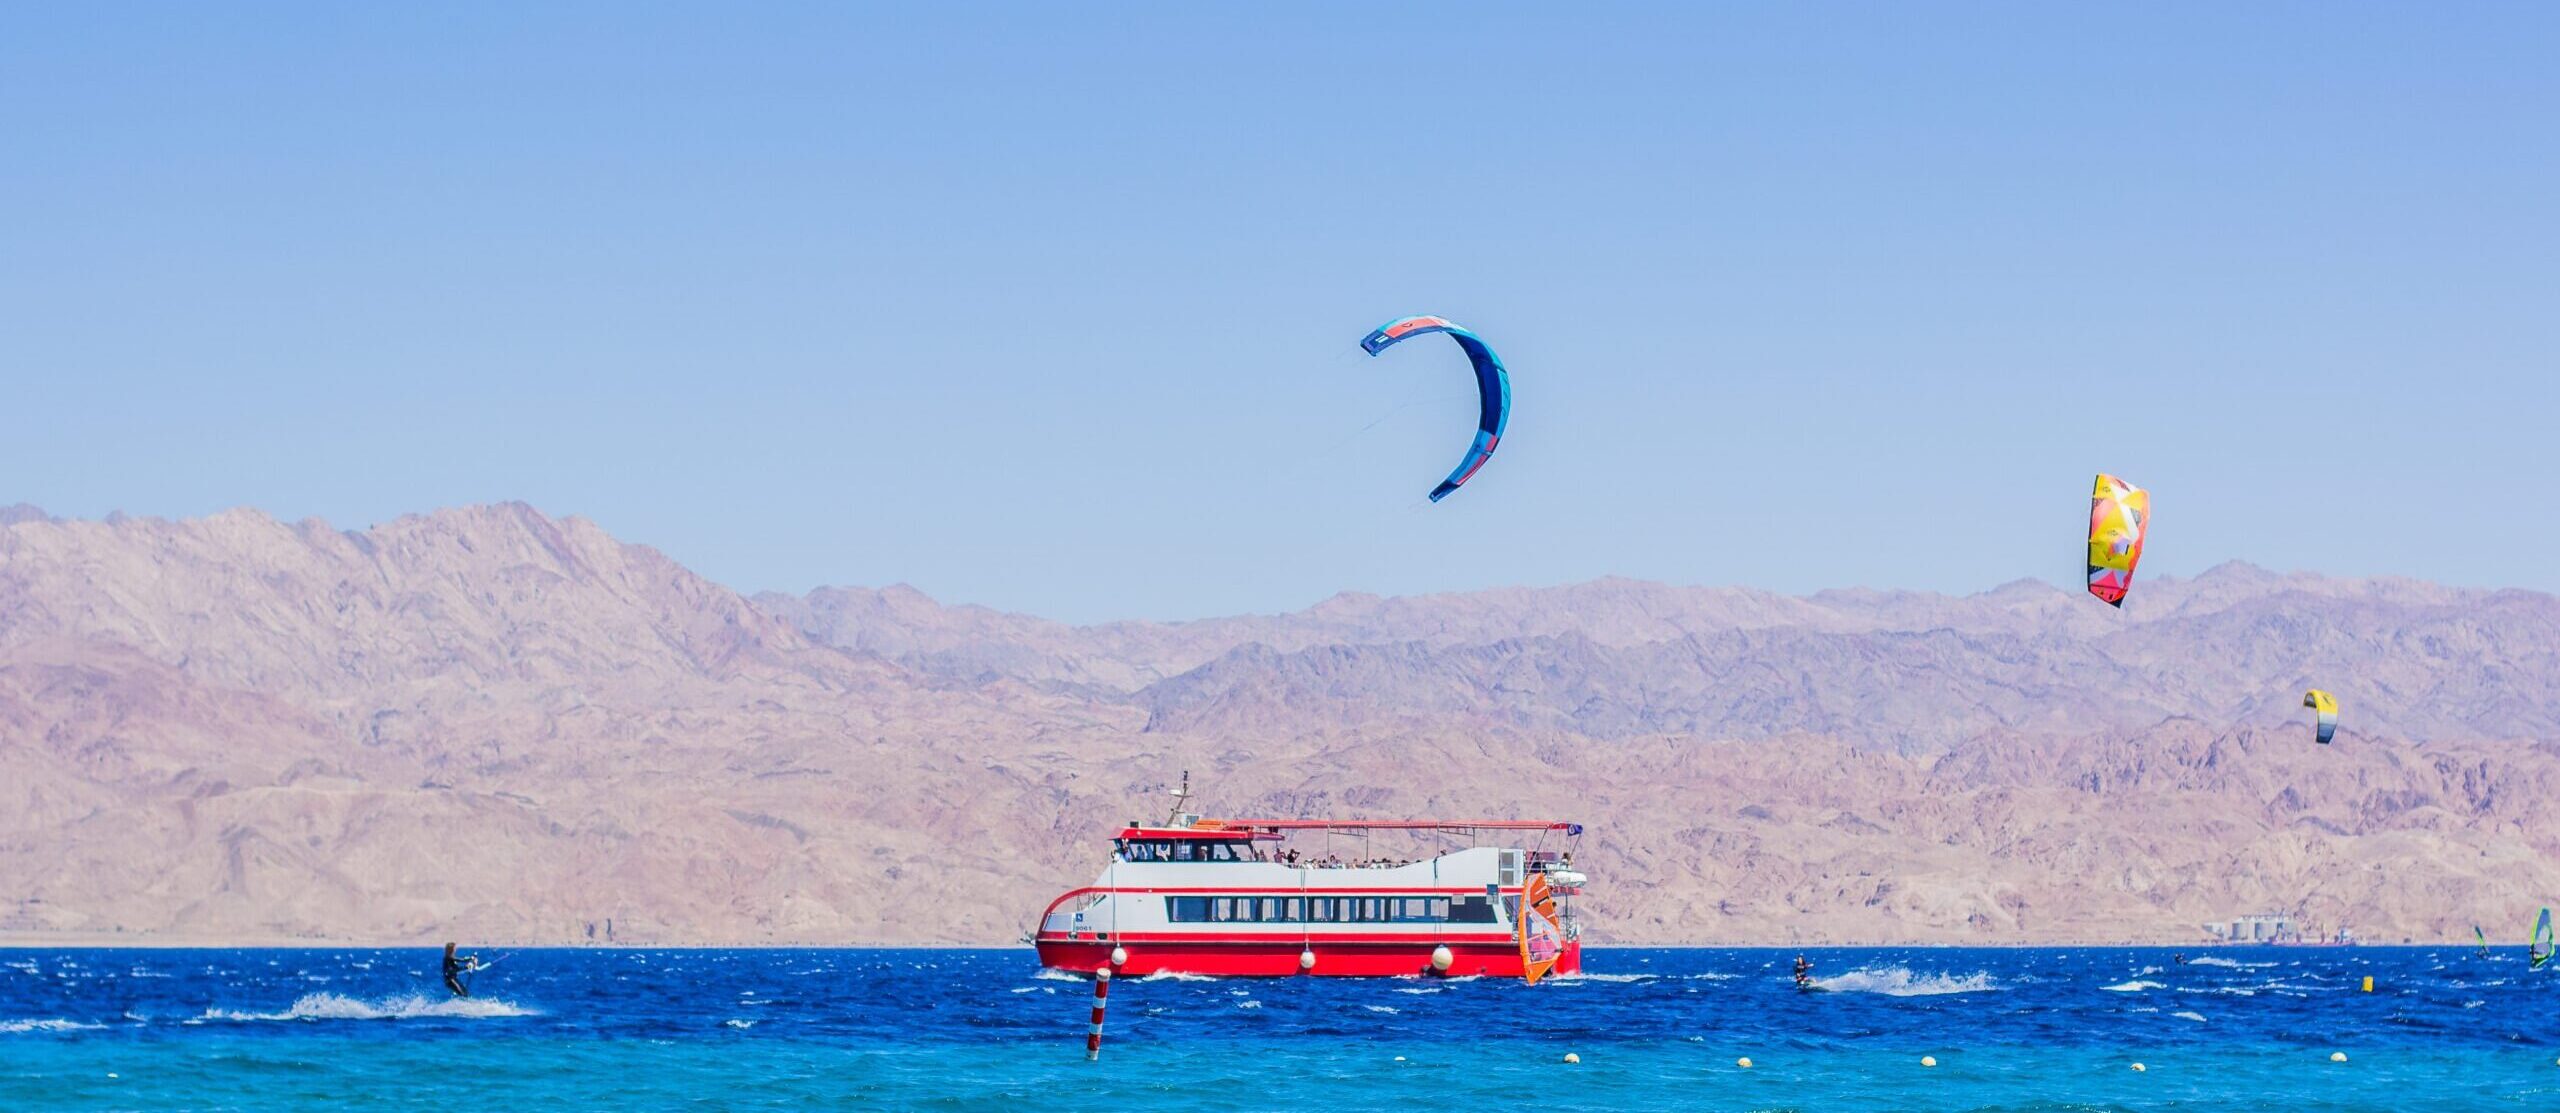 Red Sea Cruise & Snorkeling Experience From Aqaba 3